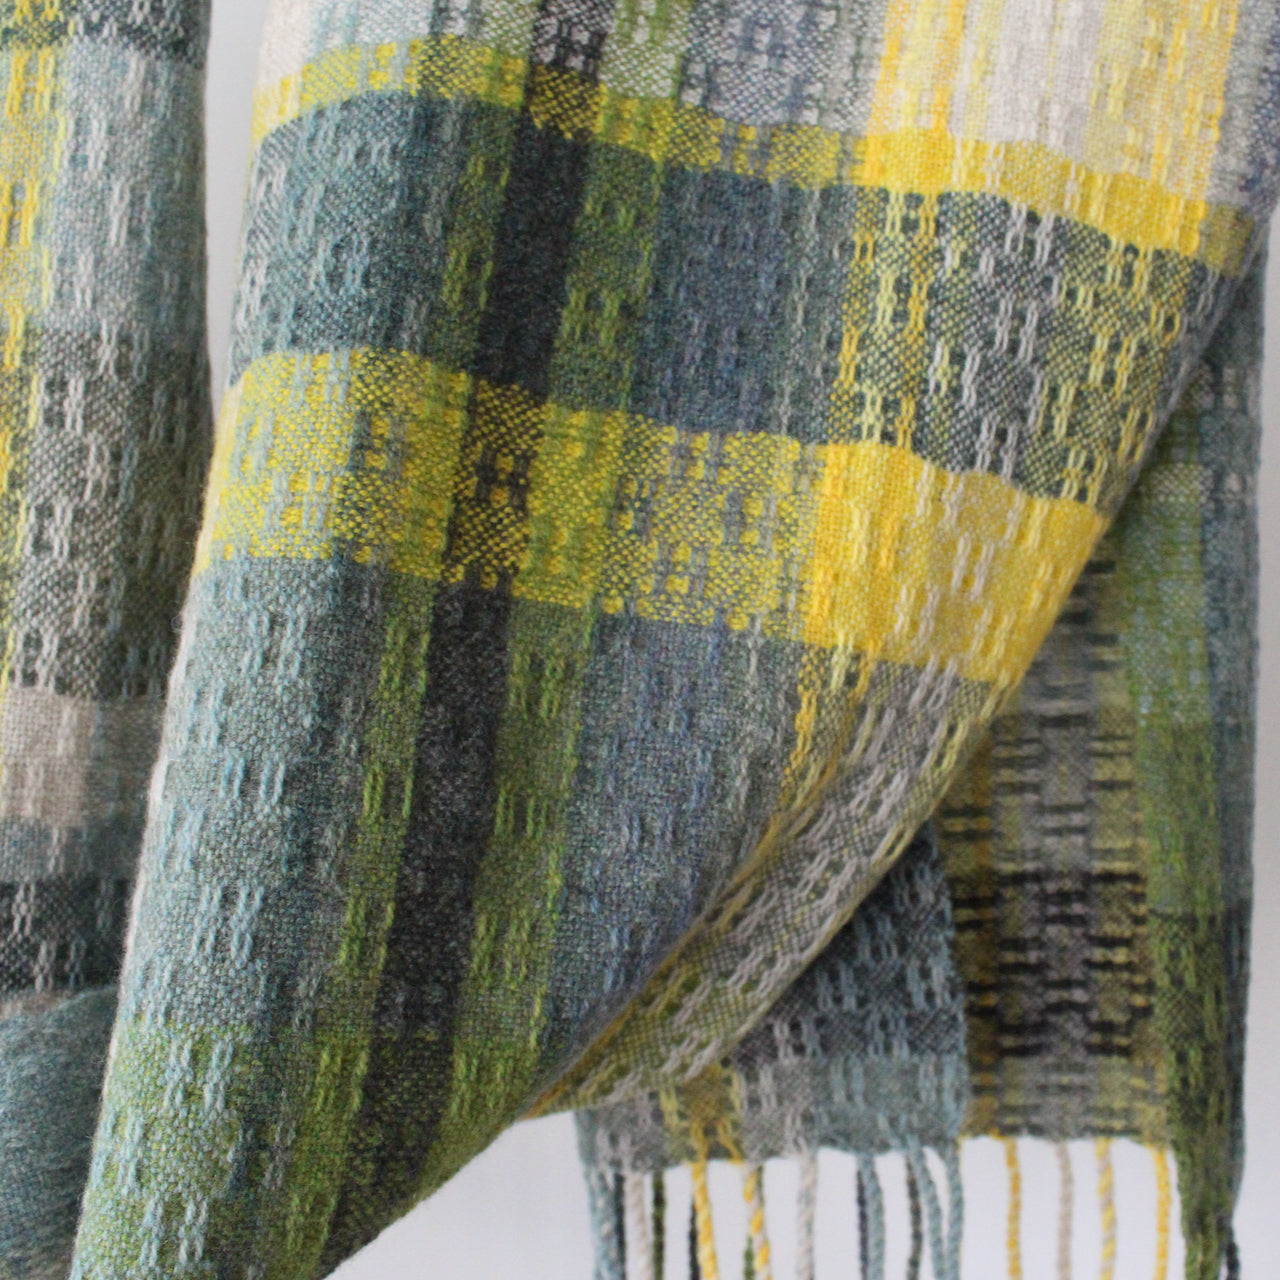 textile designer Teresa Dunne's hand-woven scarf in shades of blue, green and yellow